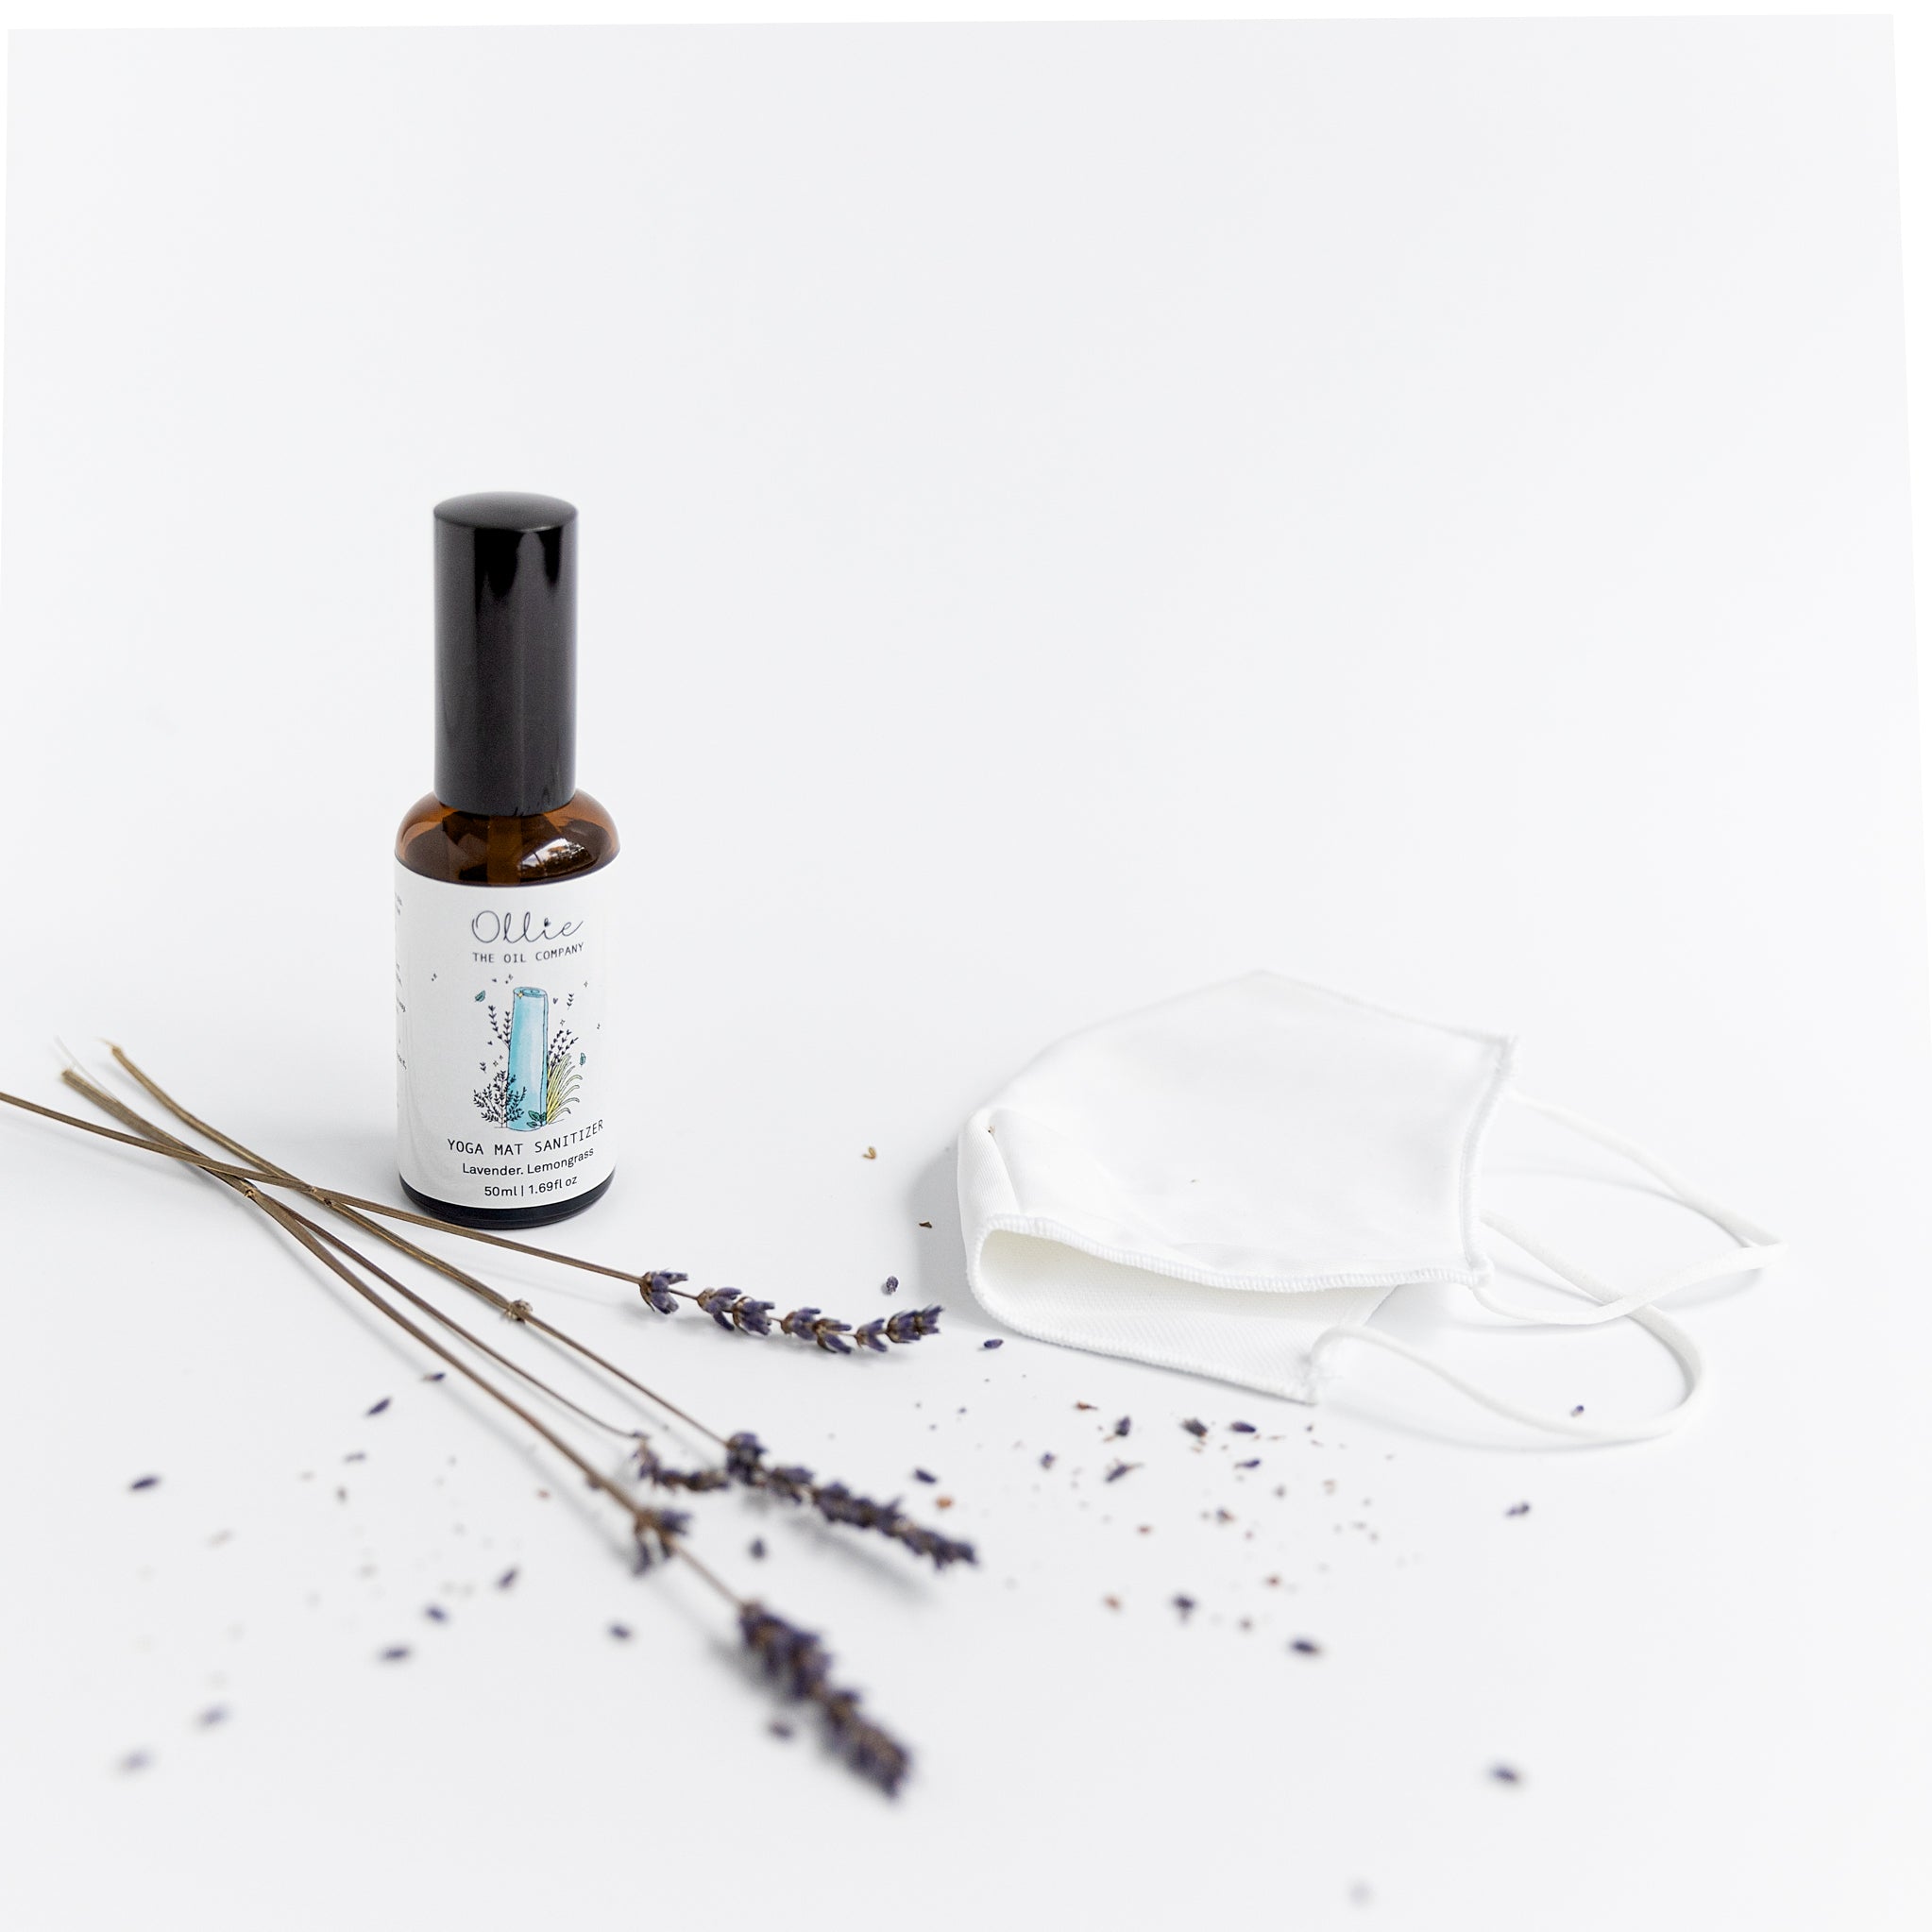 Yoga Mat Sanitizer | Yoga Accessories | The Green Collective SG